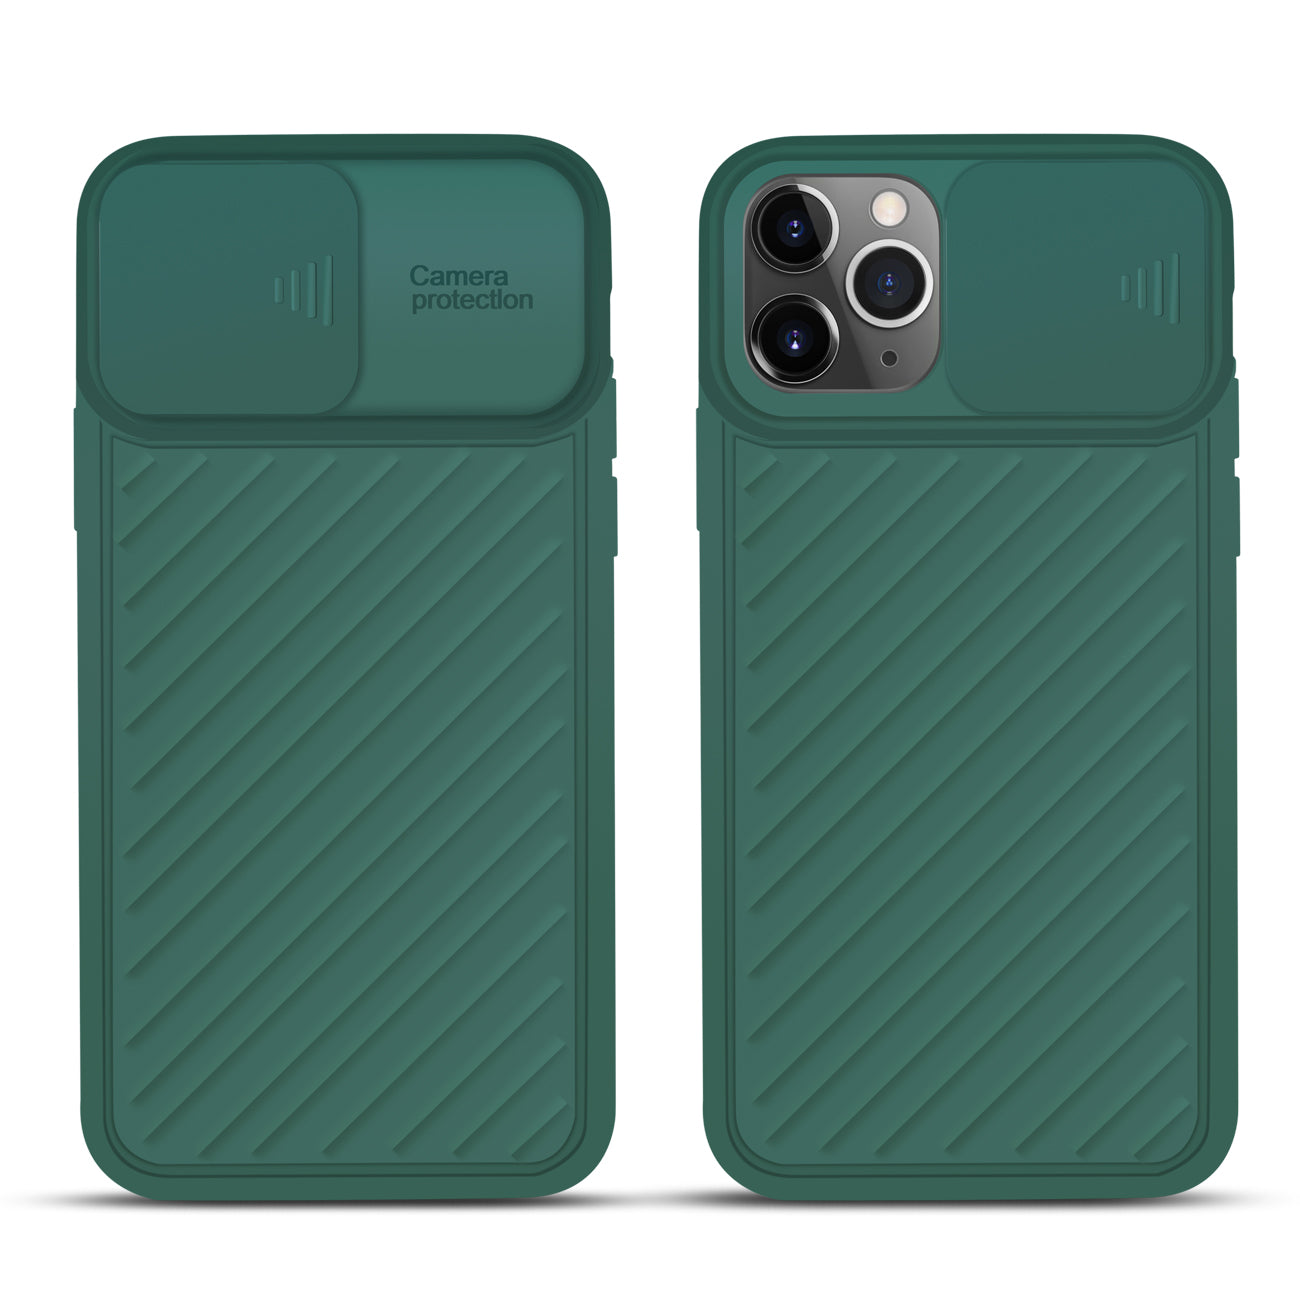 Camshield Series Case With Slide Camera CoverTpu Case For APPLE IPHONE 11 PRO In Green